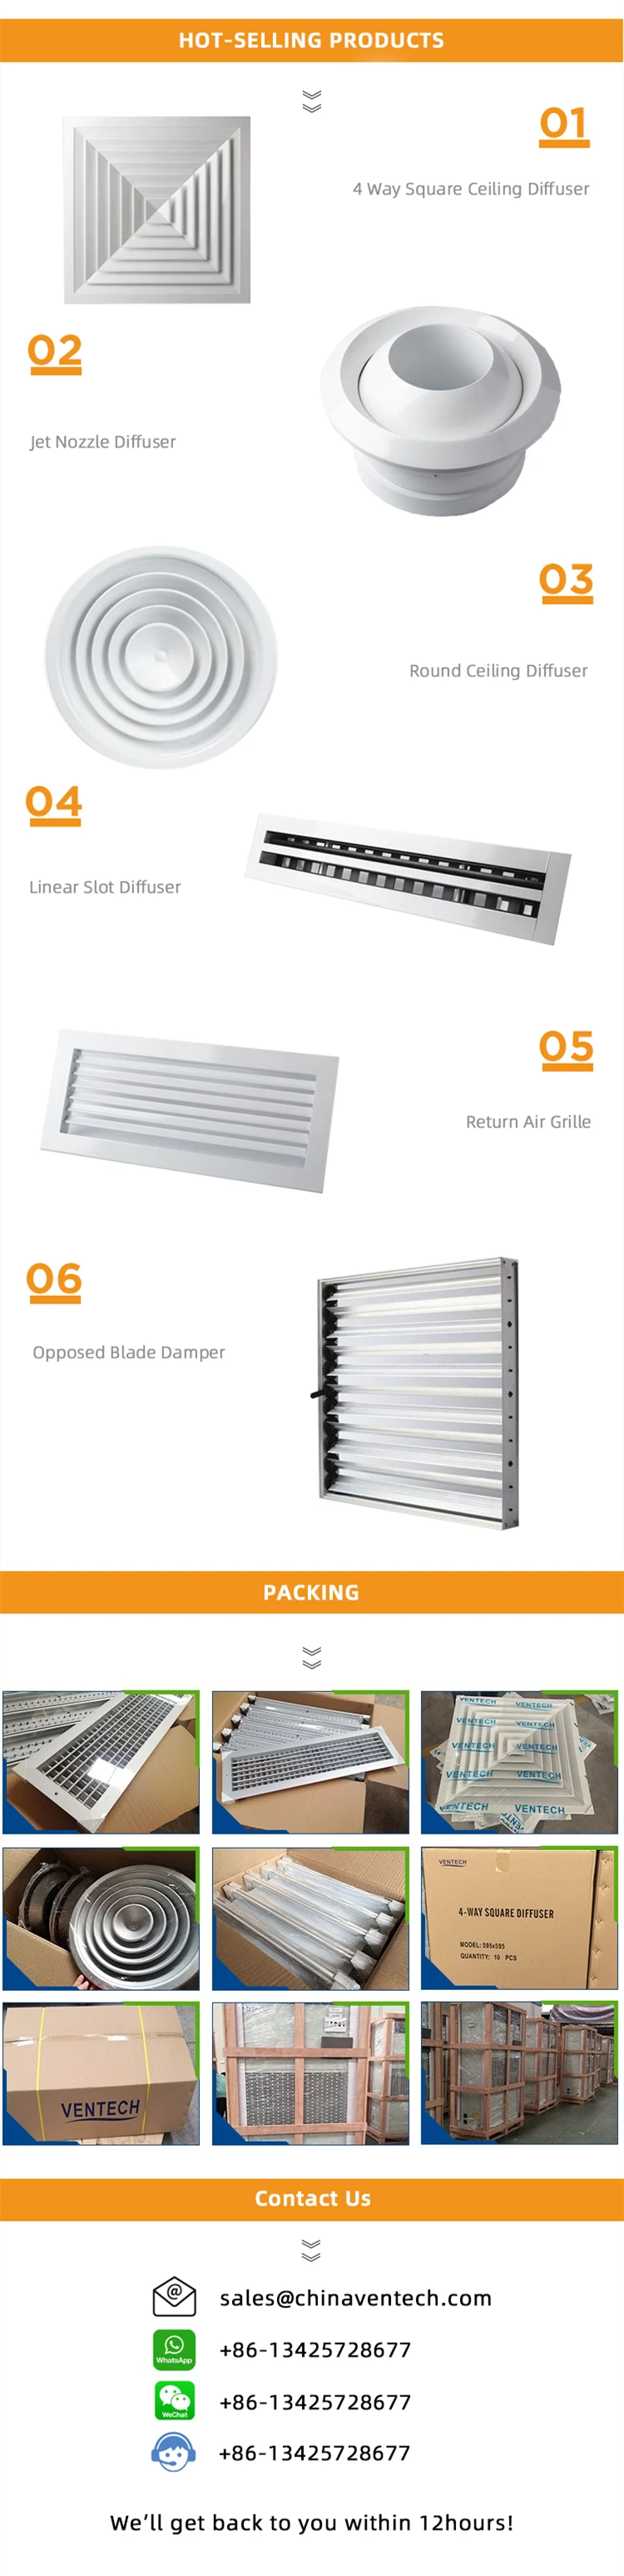 Hvac System With Damper Anodized Vent Deflectors Plastic Round High Ceiling Air Diffuser Parts